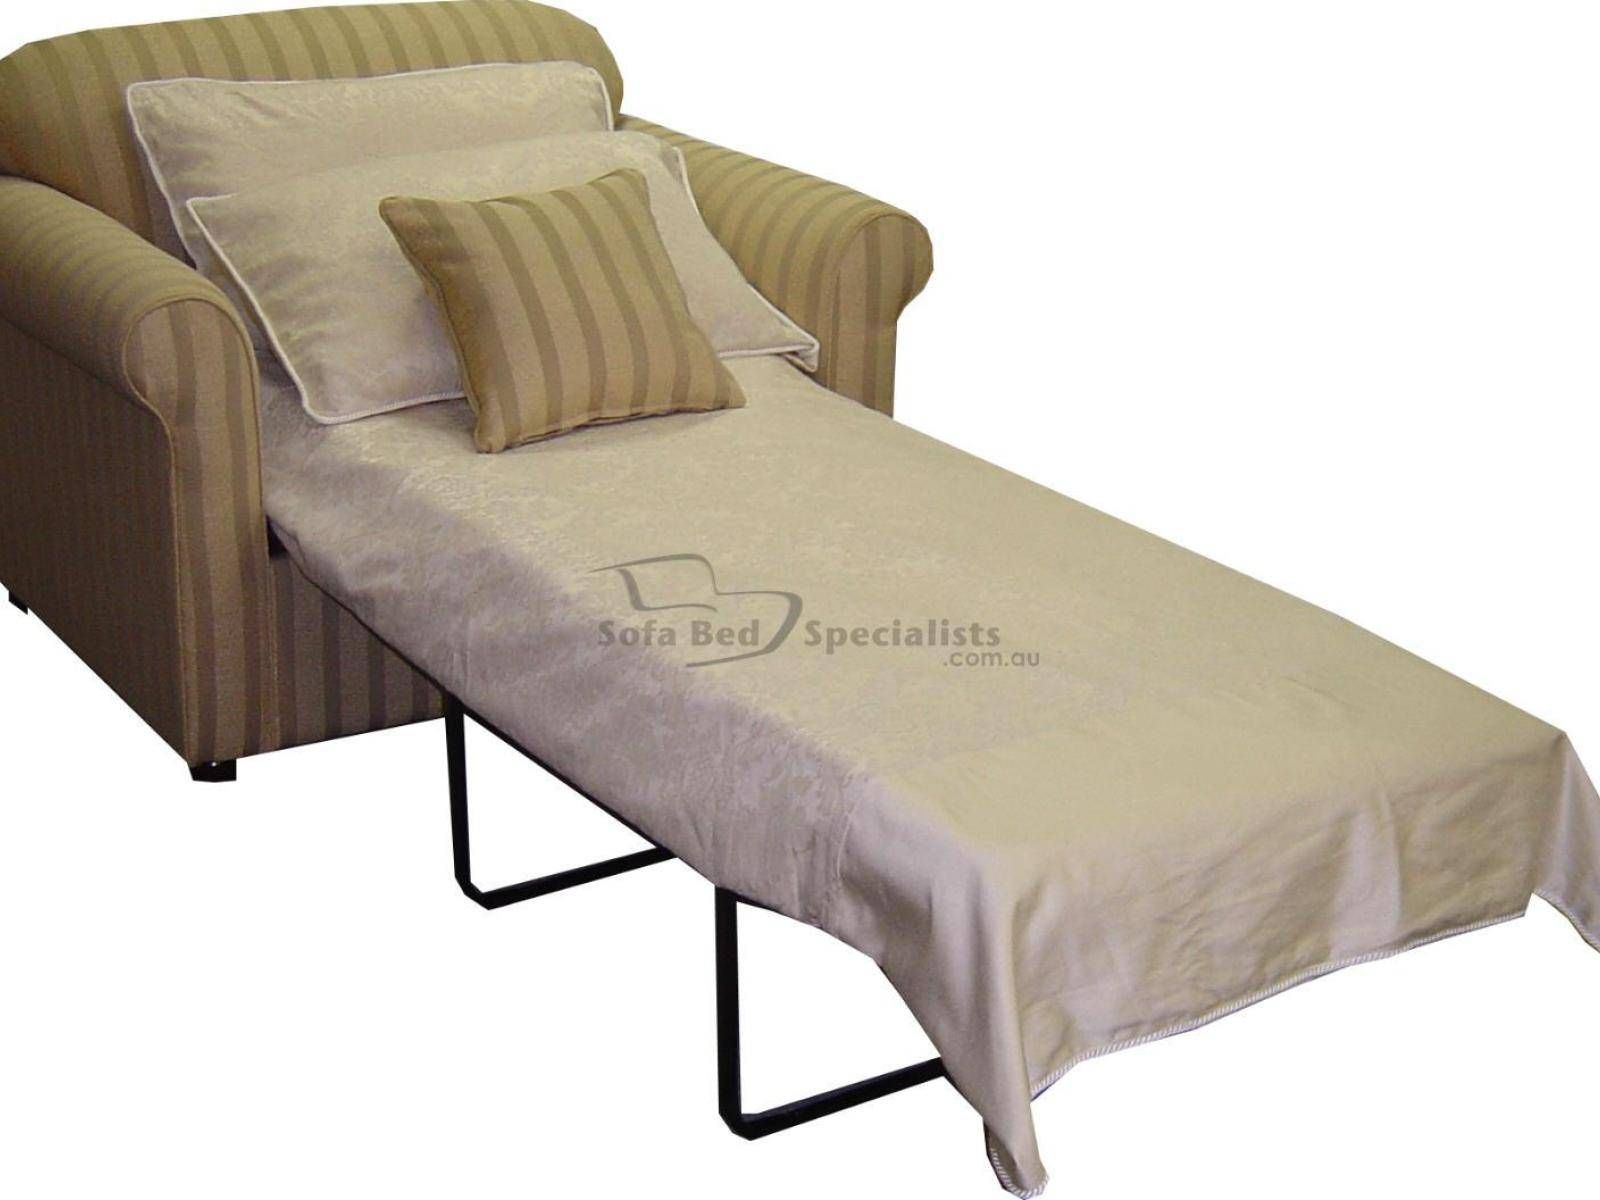 ▻ Sofa : 31 Folding A Futon Bed 2 Foam Sleeper Sofa Bed Mattress Intended For Folding Sofa Chairs (View 21 of 30)